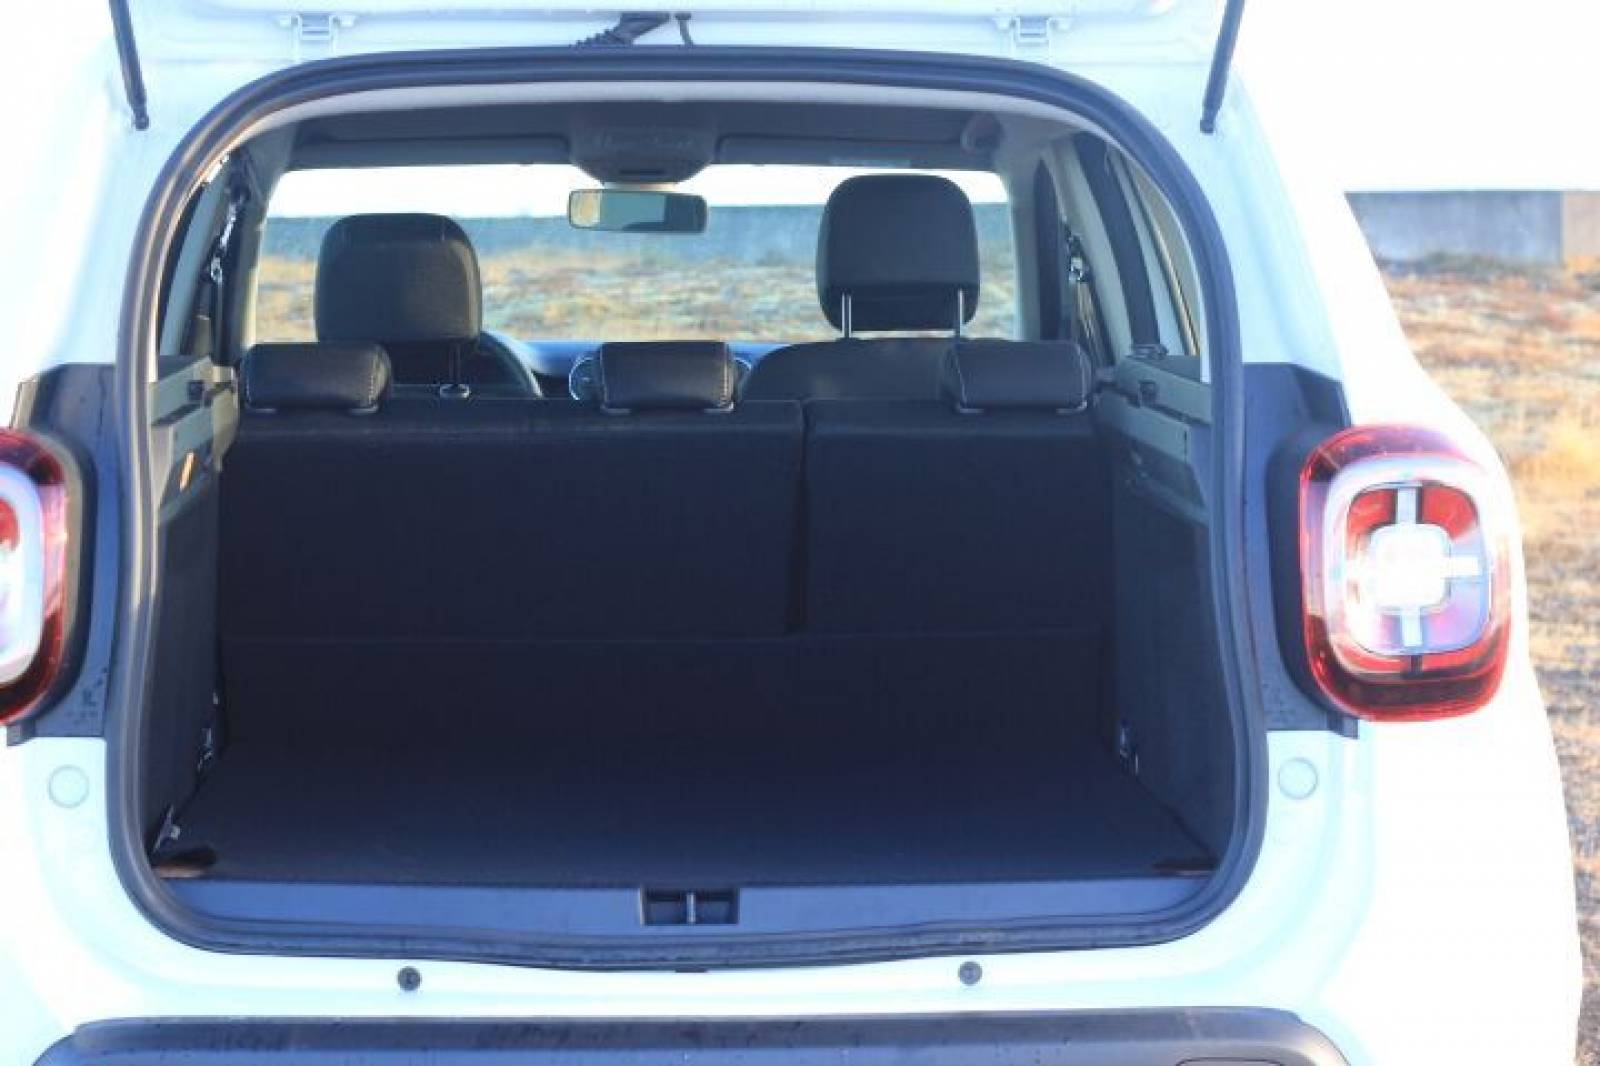 Dacia Duster with Luggage Space